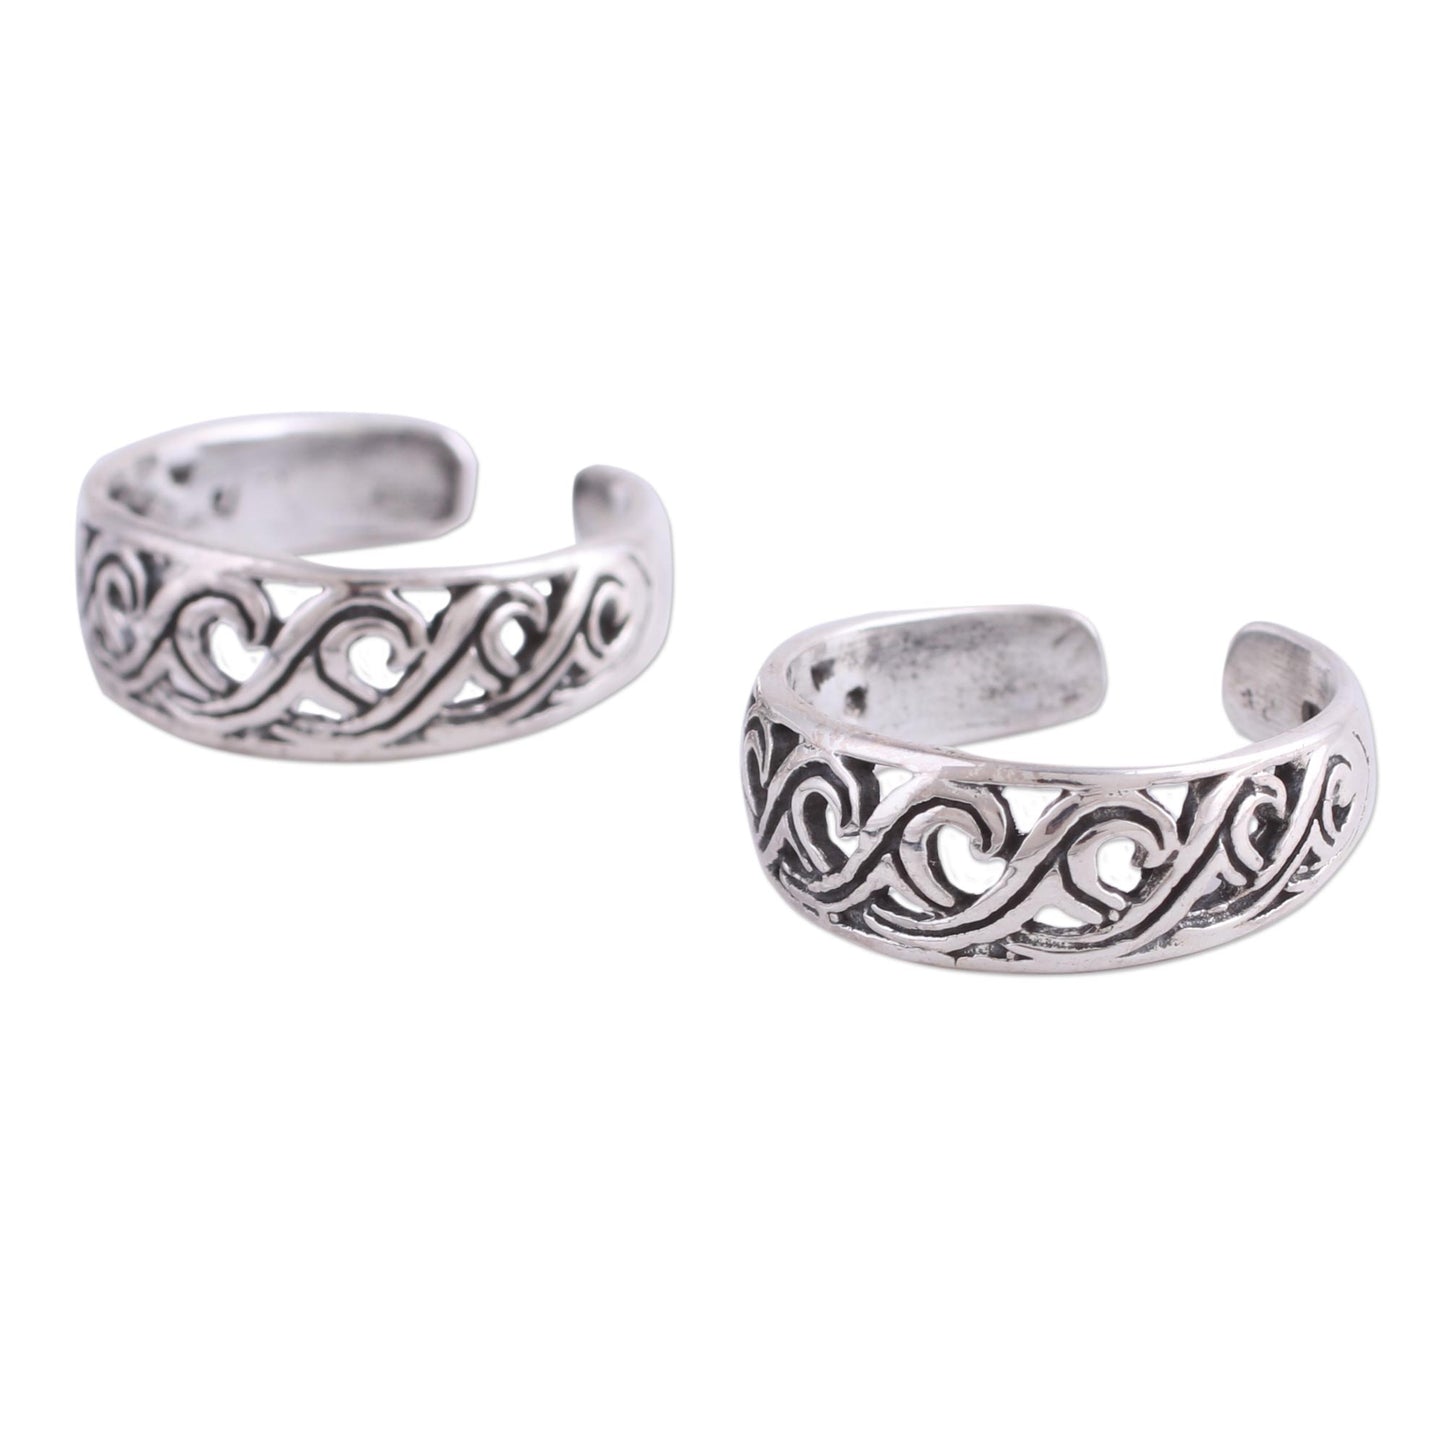 Fascinating Swirls Handcrafted Sterling Silver Pair of Toe Rings from India